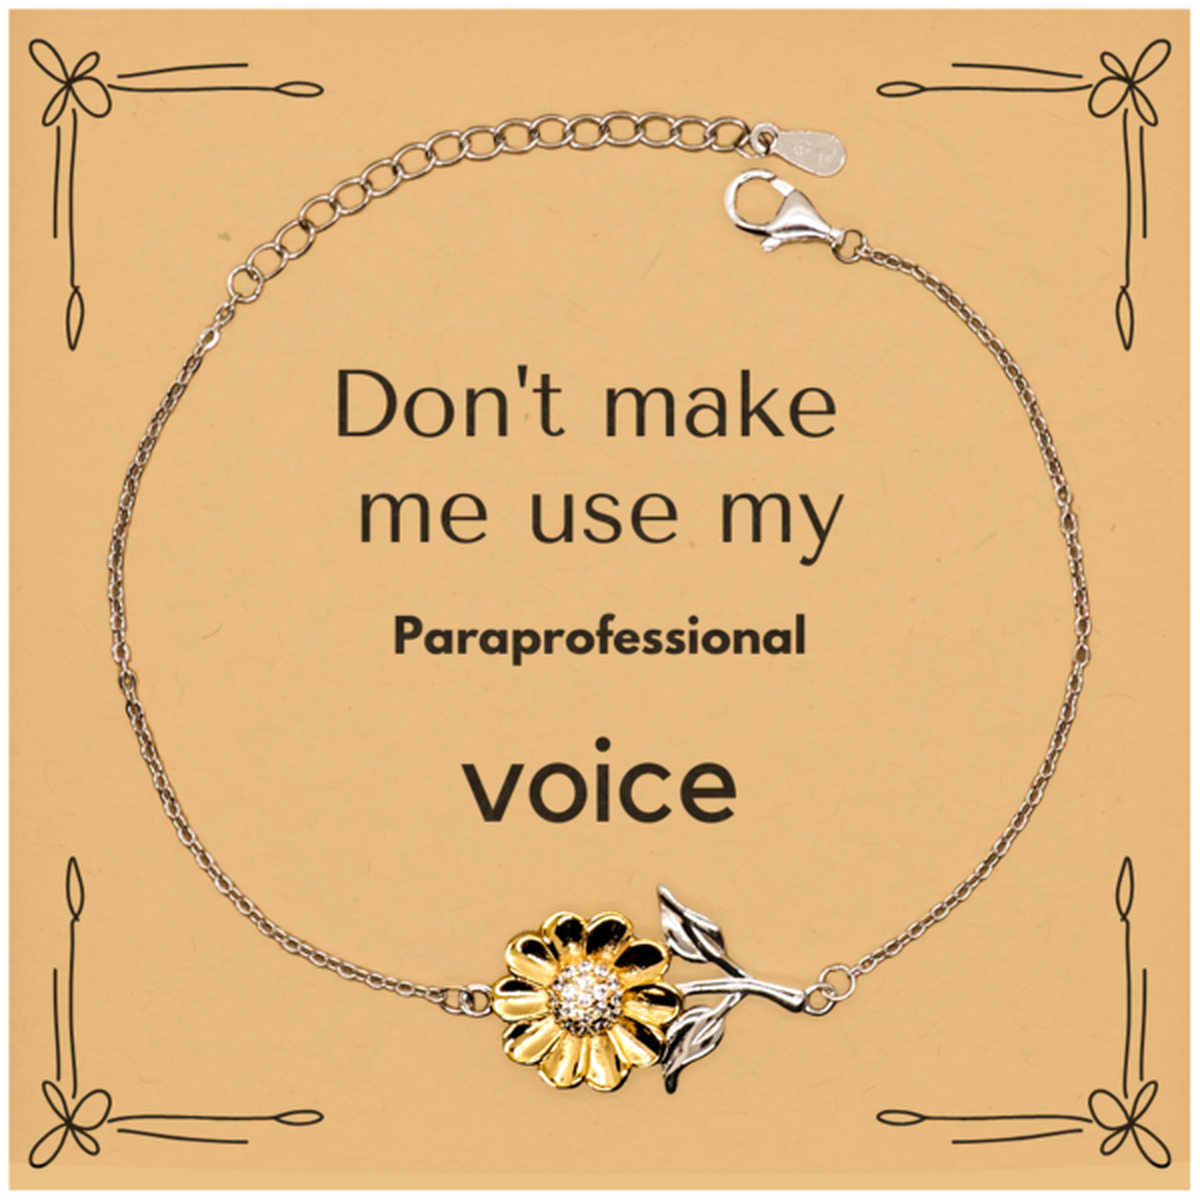 Don't make me use my Paraprofessional voice, Sarcasm Paraprofessional Card Gifts, Christmas Paraprofessional Sunflower Bracelet Birthday Unique Gifts For Paraprofessional Coworkers, Men, Women, Colleague, Friends